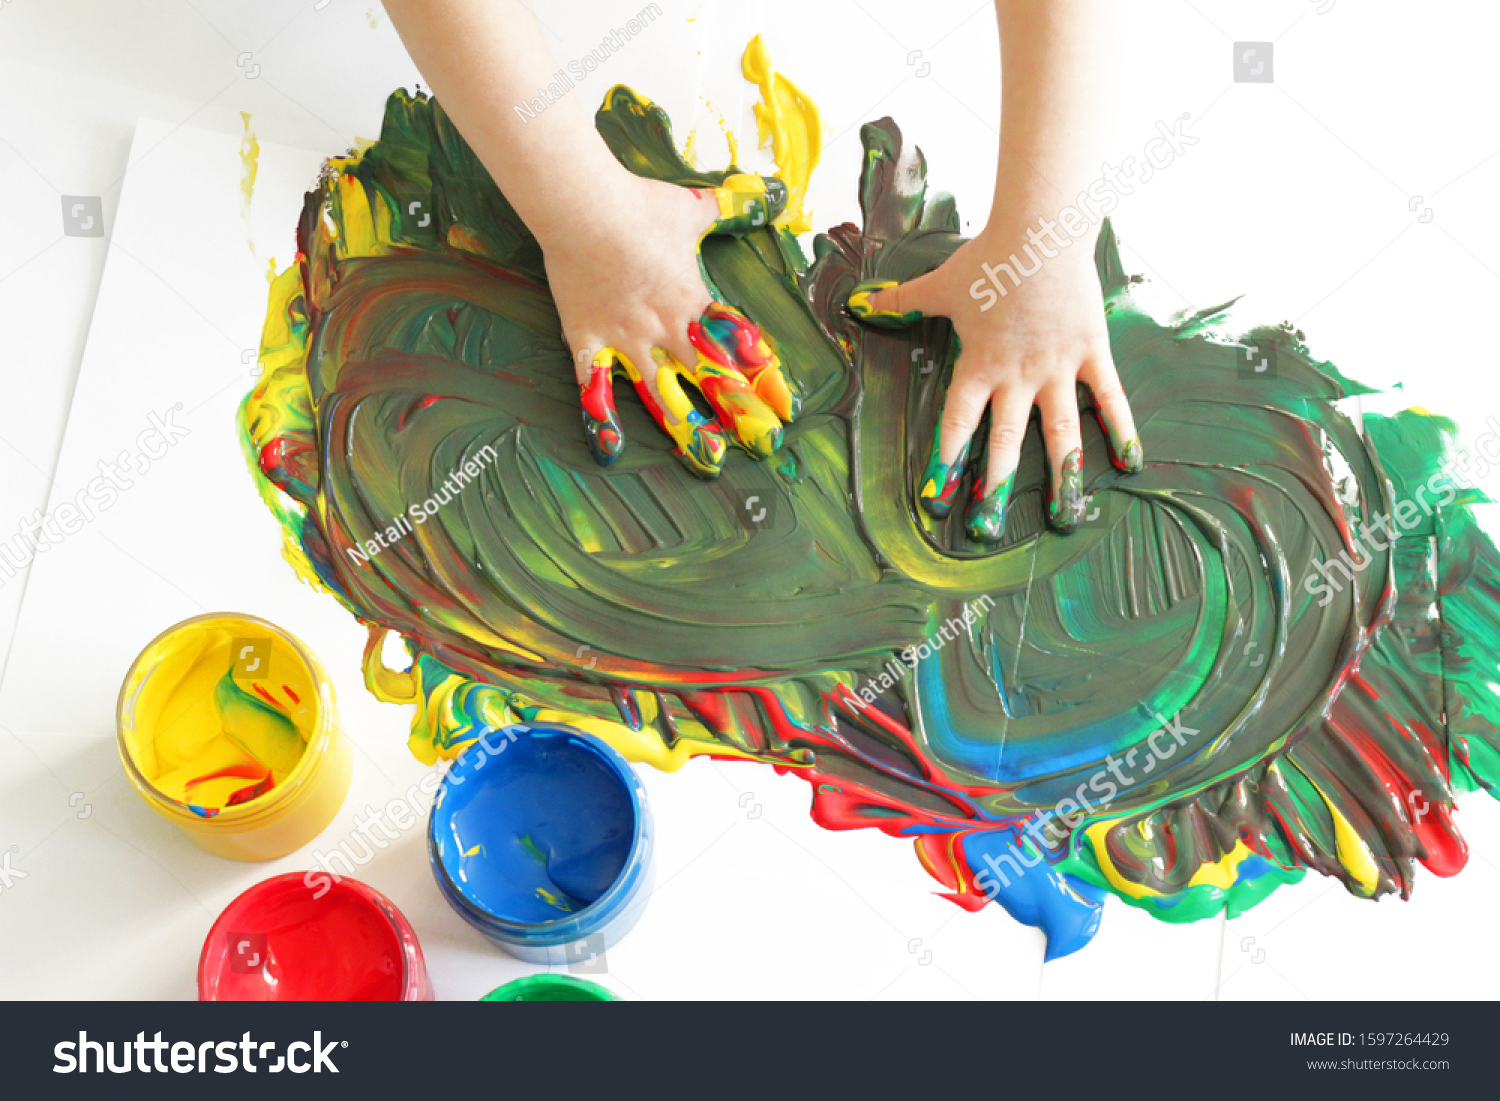 stock-photo-painting-with-finger-paints-kid-s-art-paint-cans-on-a-white-background-1597264429.jpg